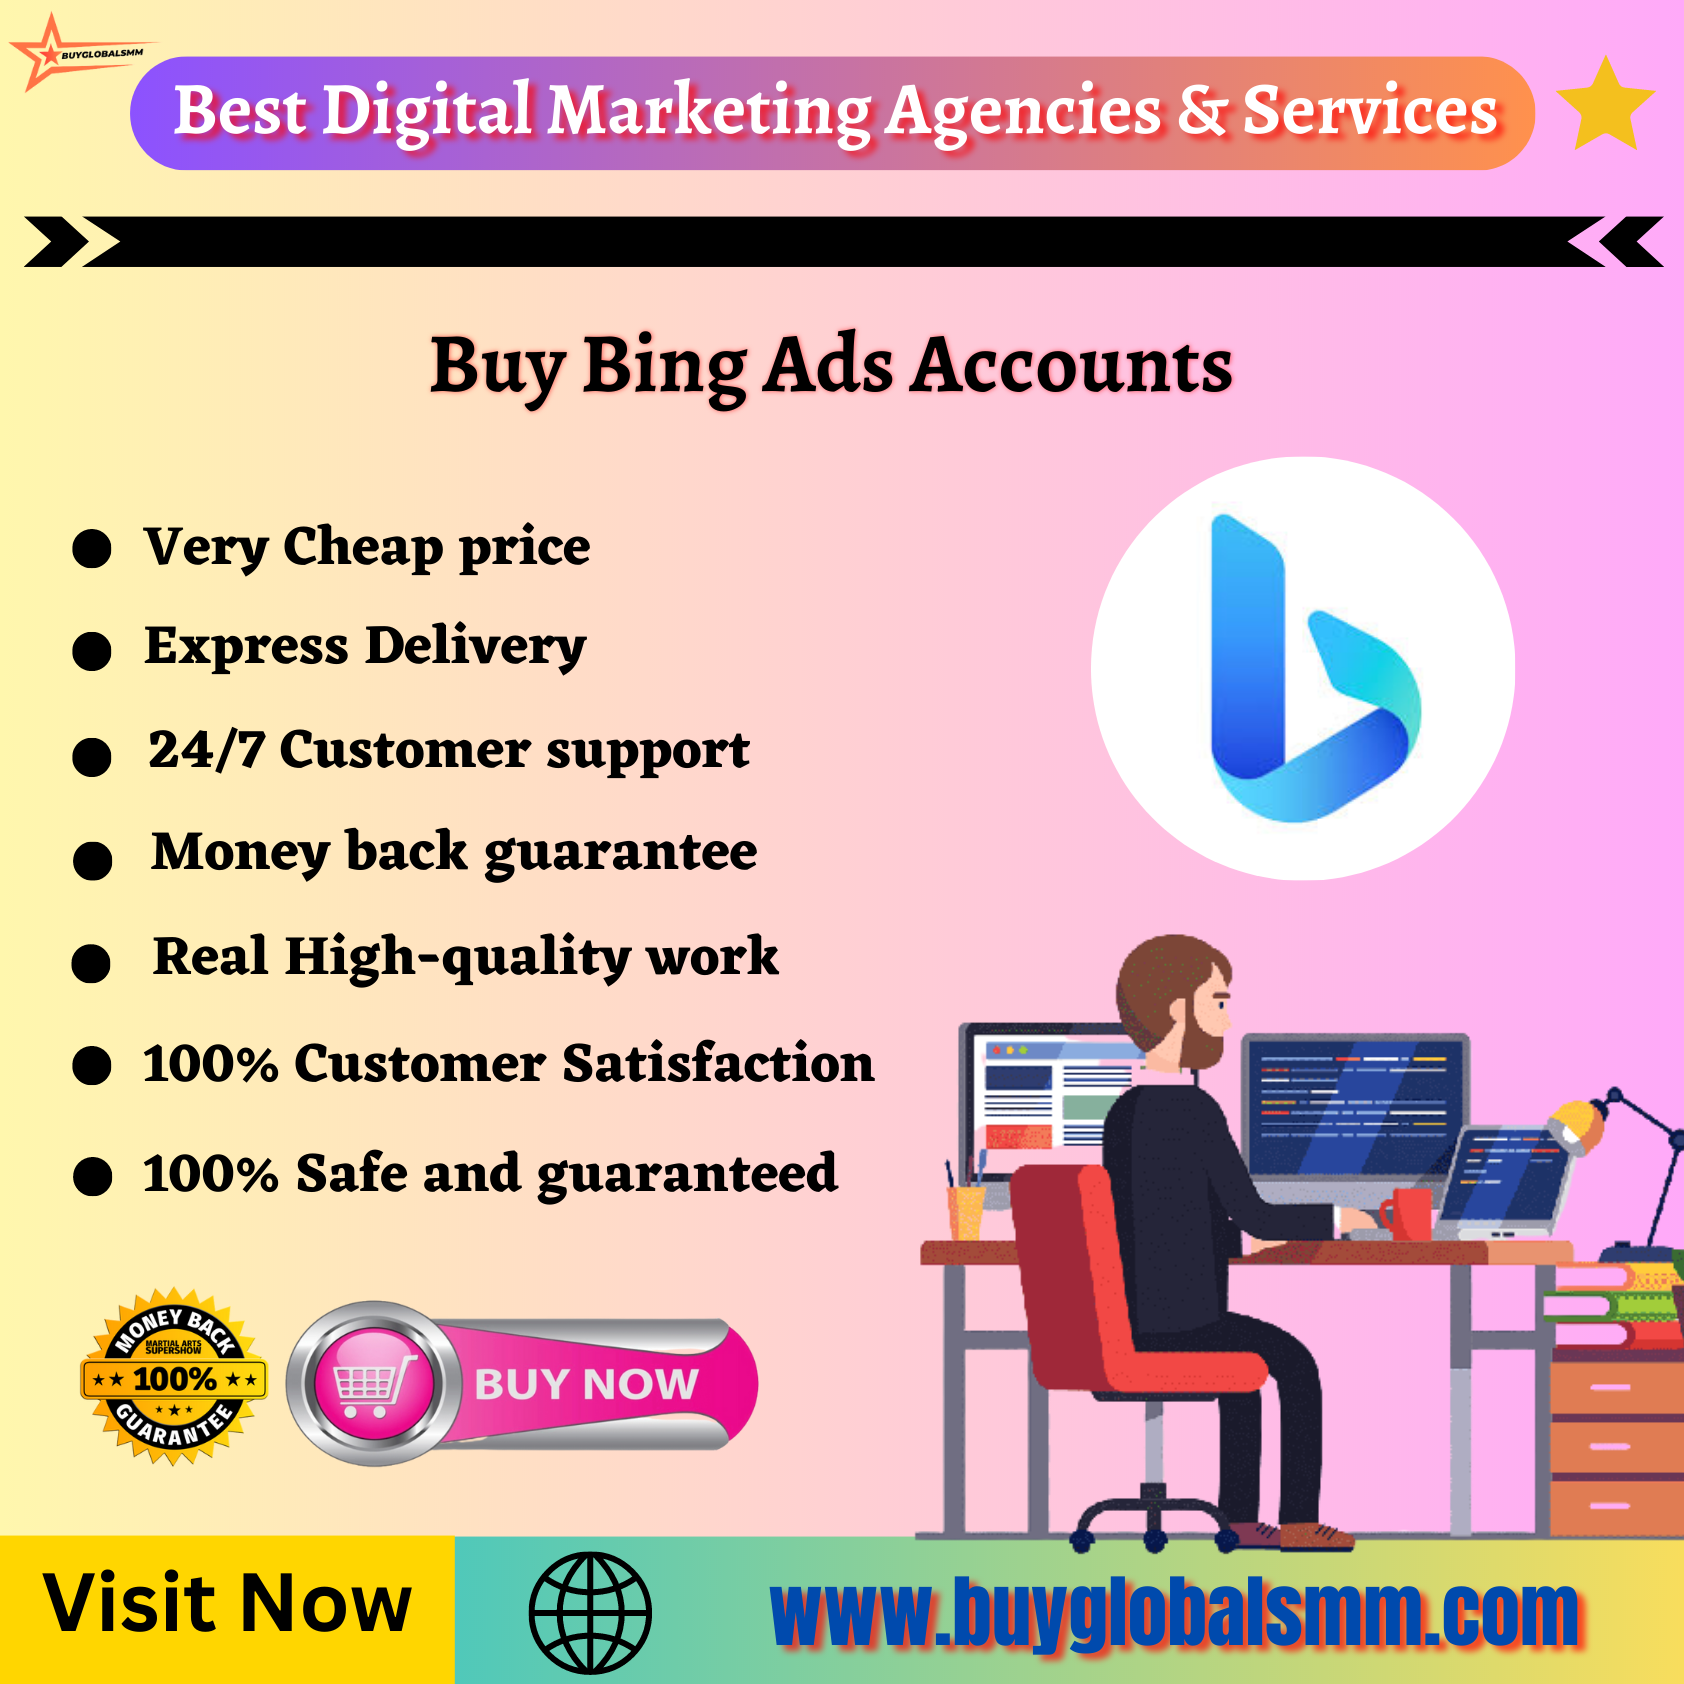 Buy Bing Ads Accounts-100% trusted service, and cheap...